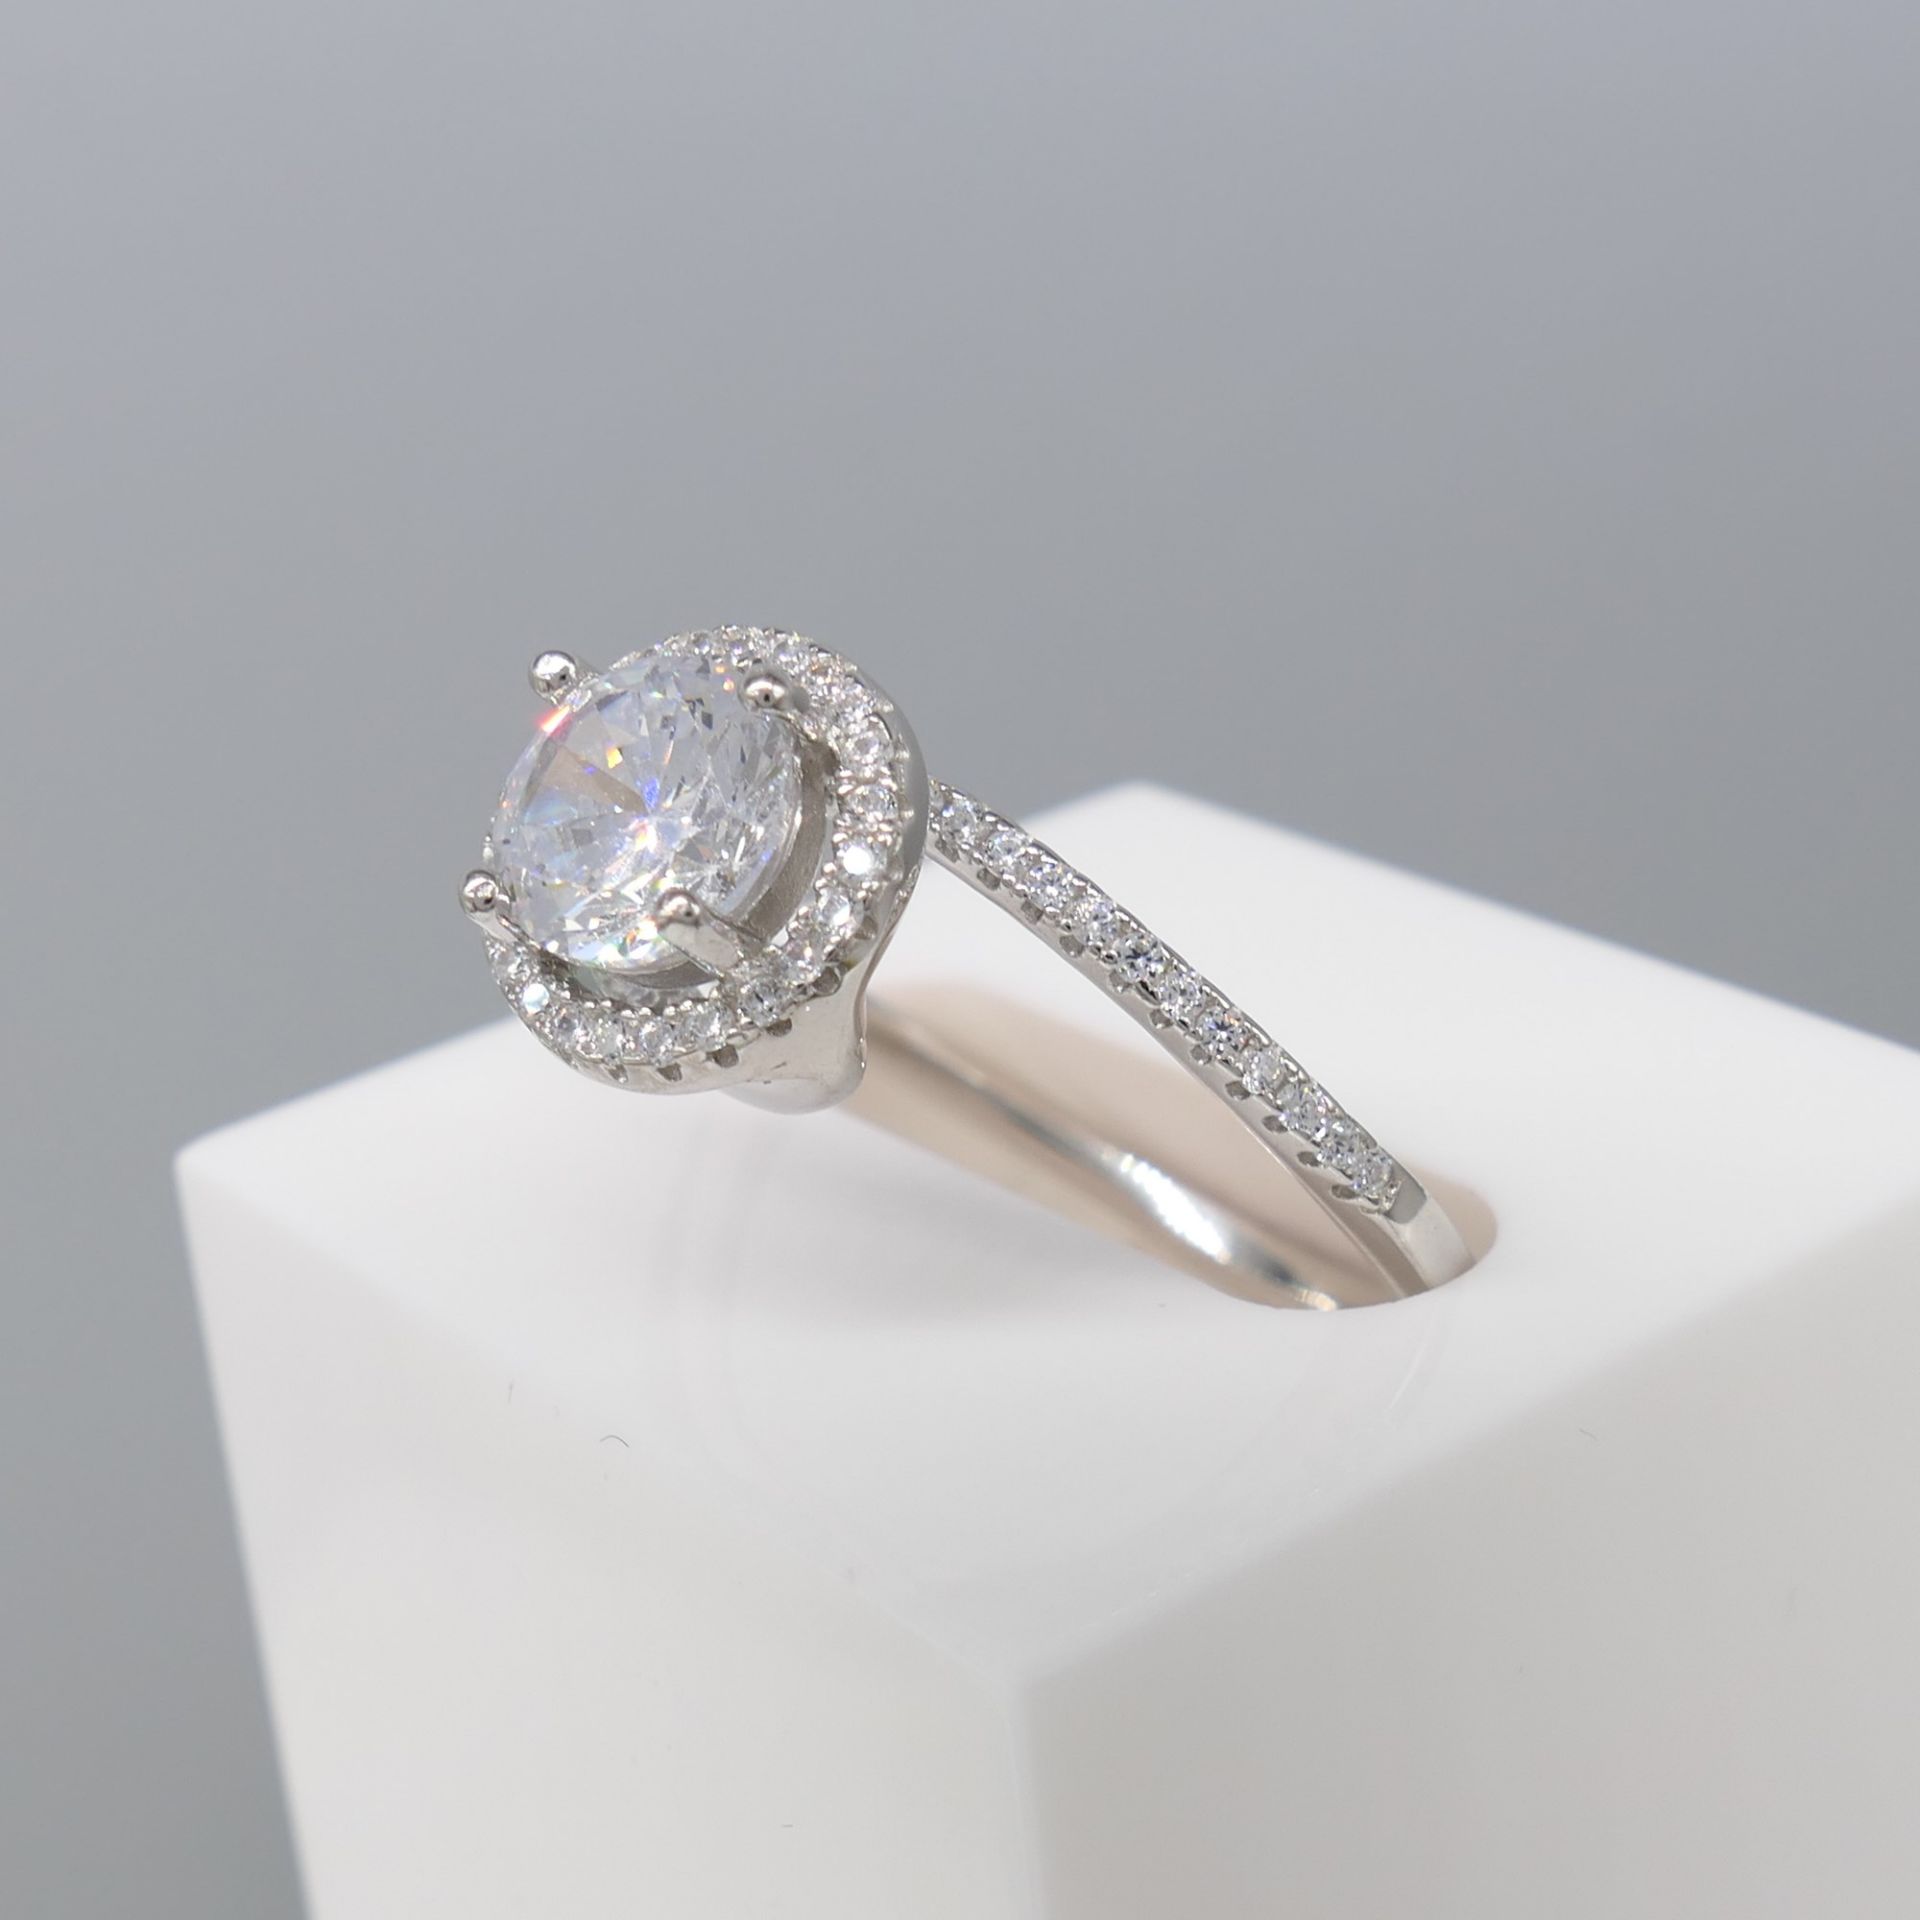 Silver cubic zirconia halo and twist dress ring - Image 4 of 6